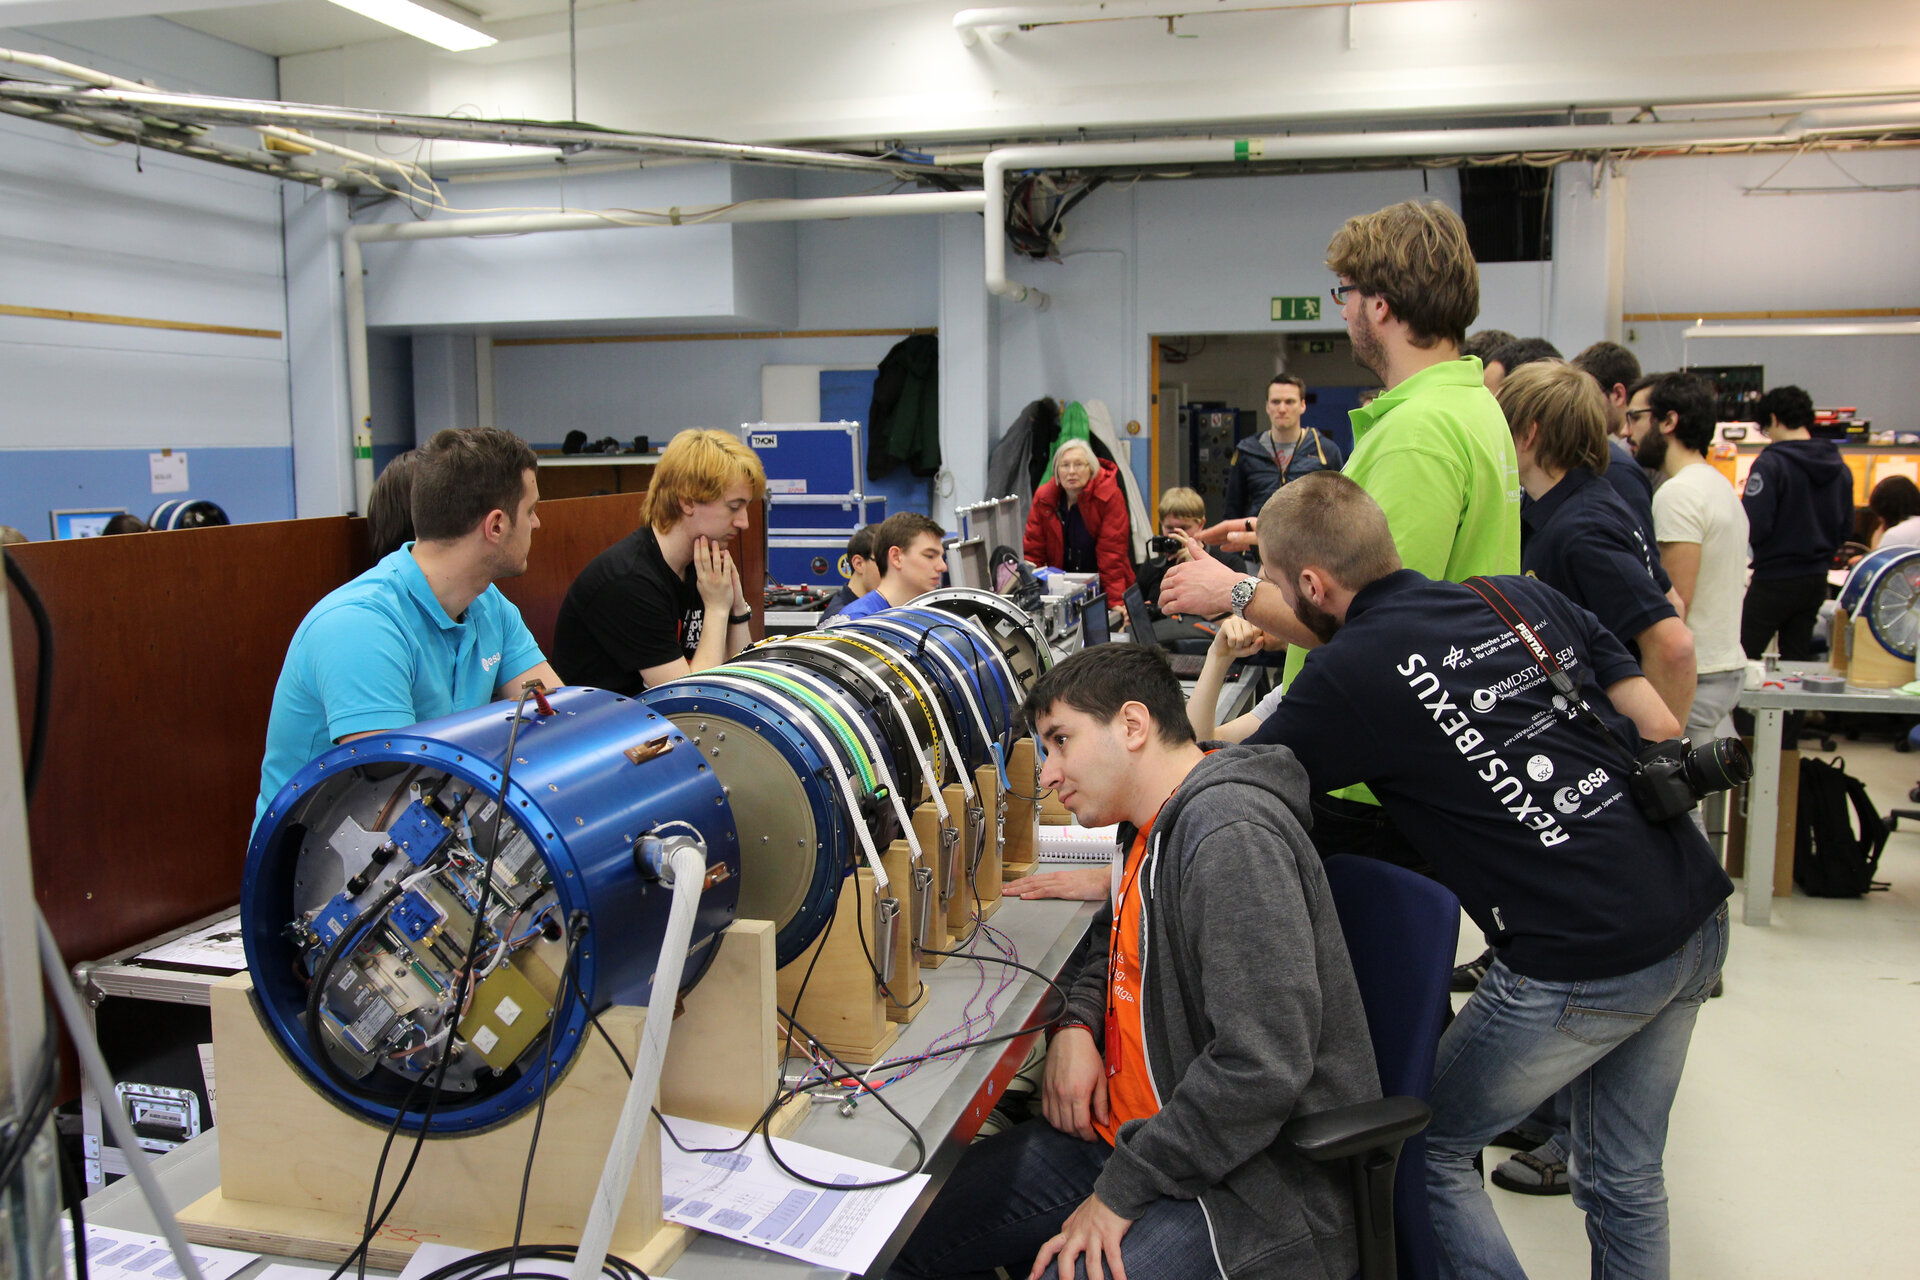 Students performing final tests on rocket